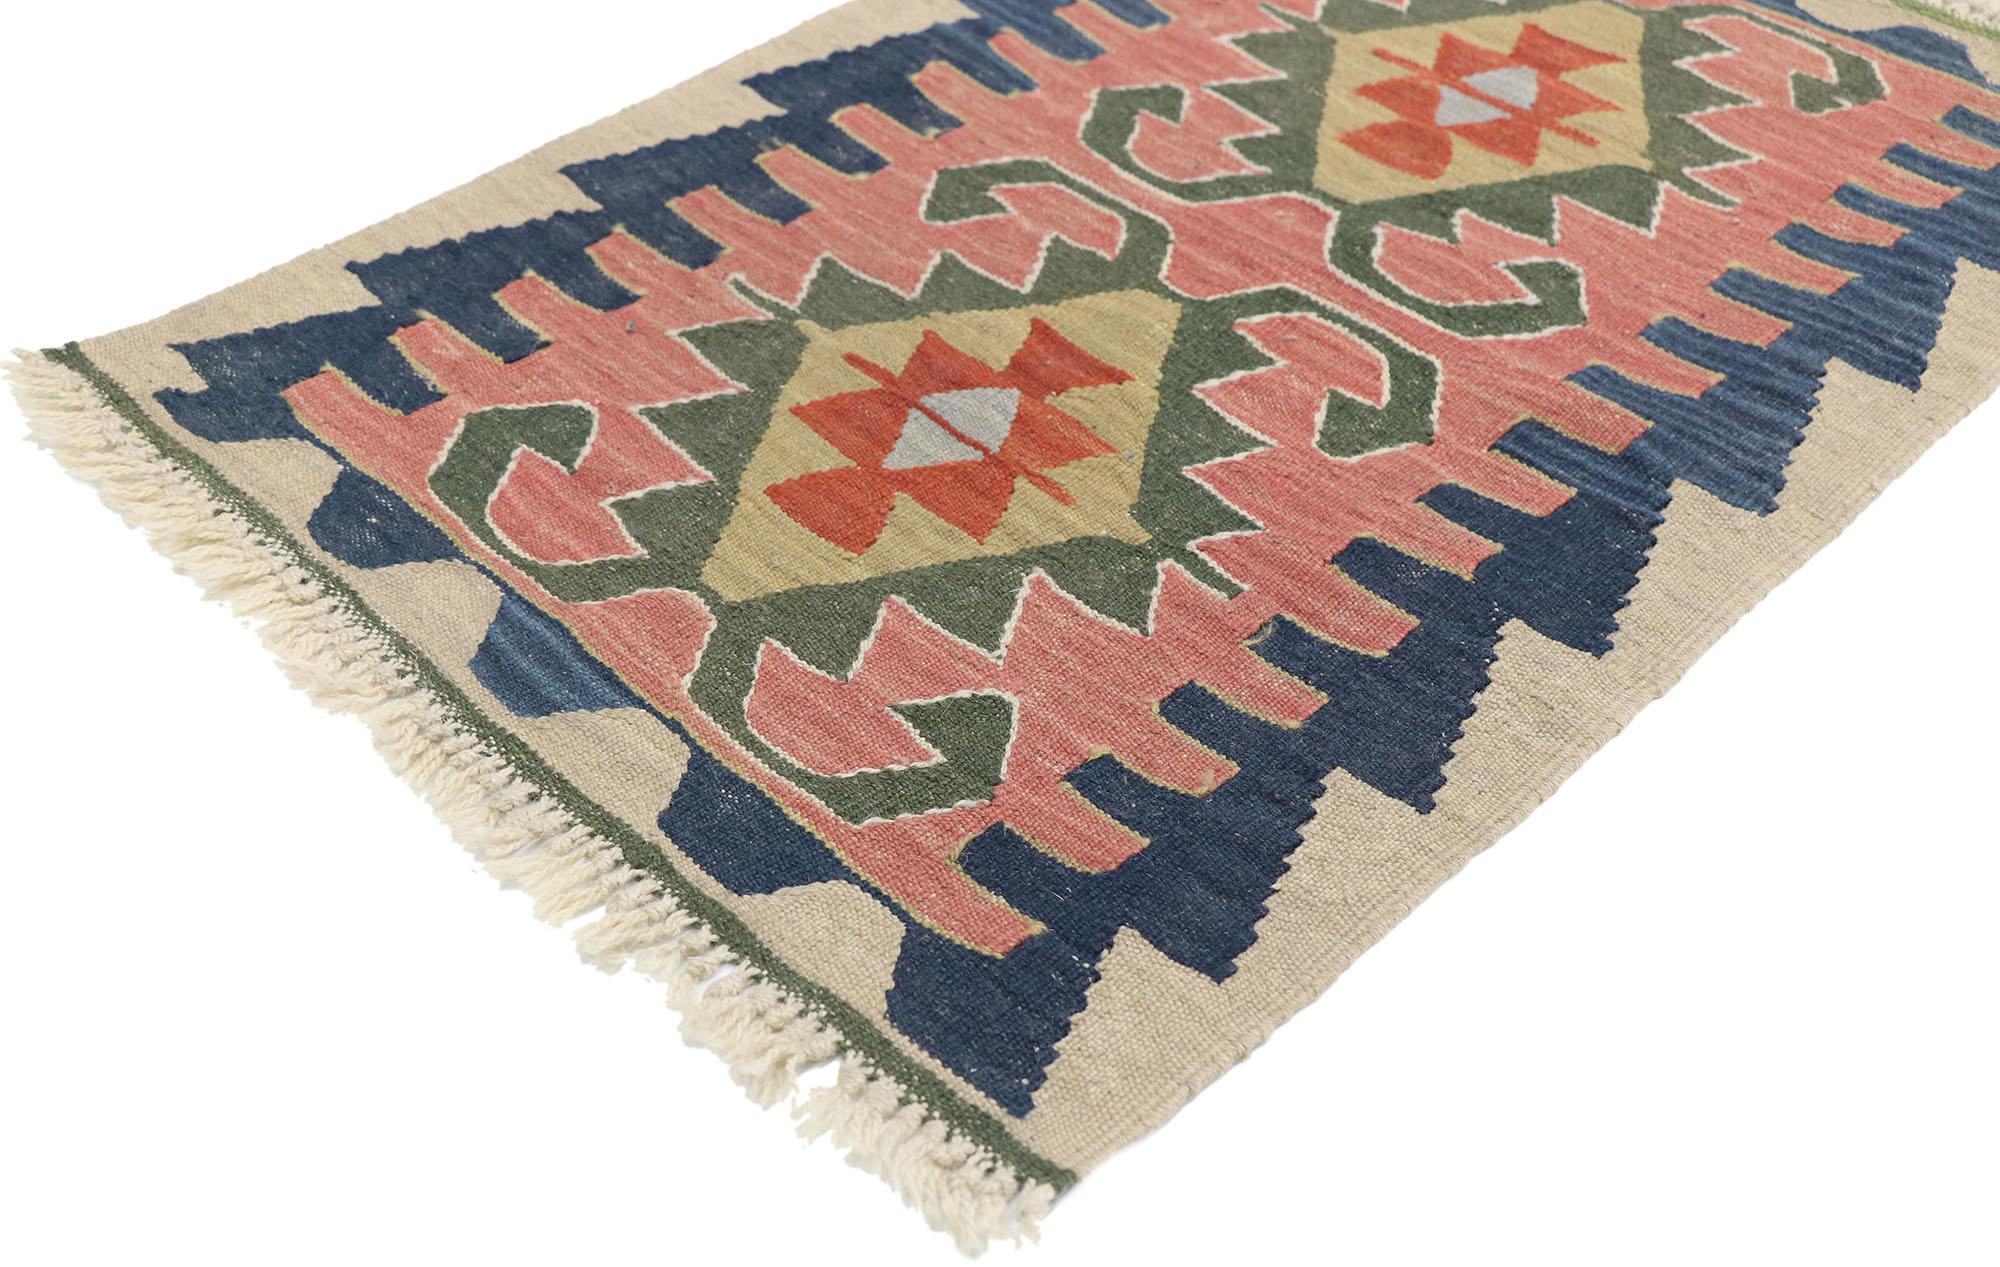 77897, vintage Persian Shiraz Kilim rug with Bohemian Tribal style. Full of tiny details and a bold expressive design combined with vibrant colors and tribal style, this hand-woven wool vintage Persian Shiraz kilim rug is a captivating vision of